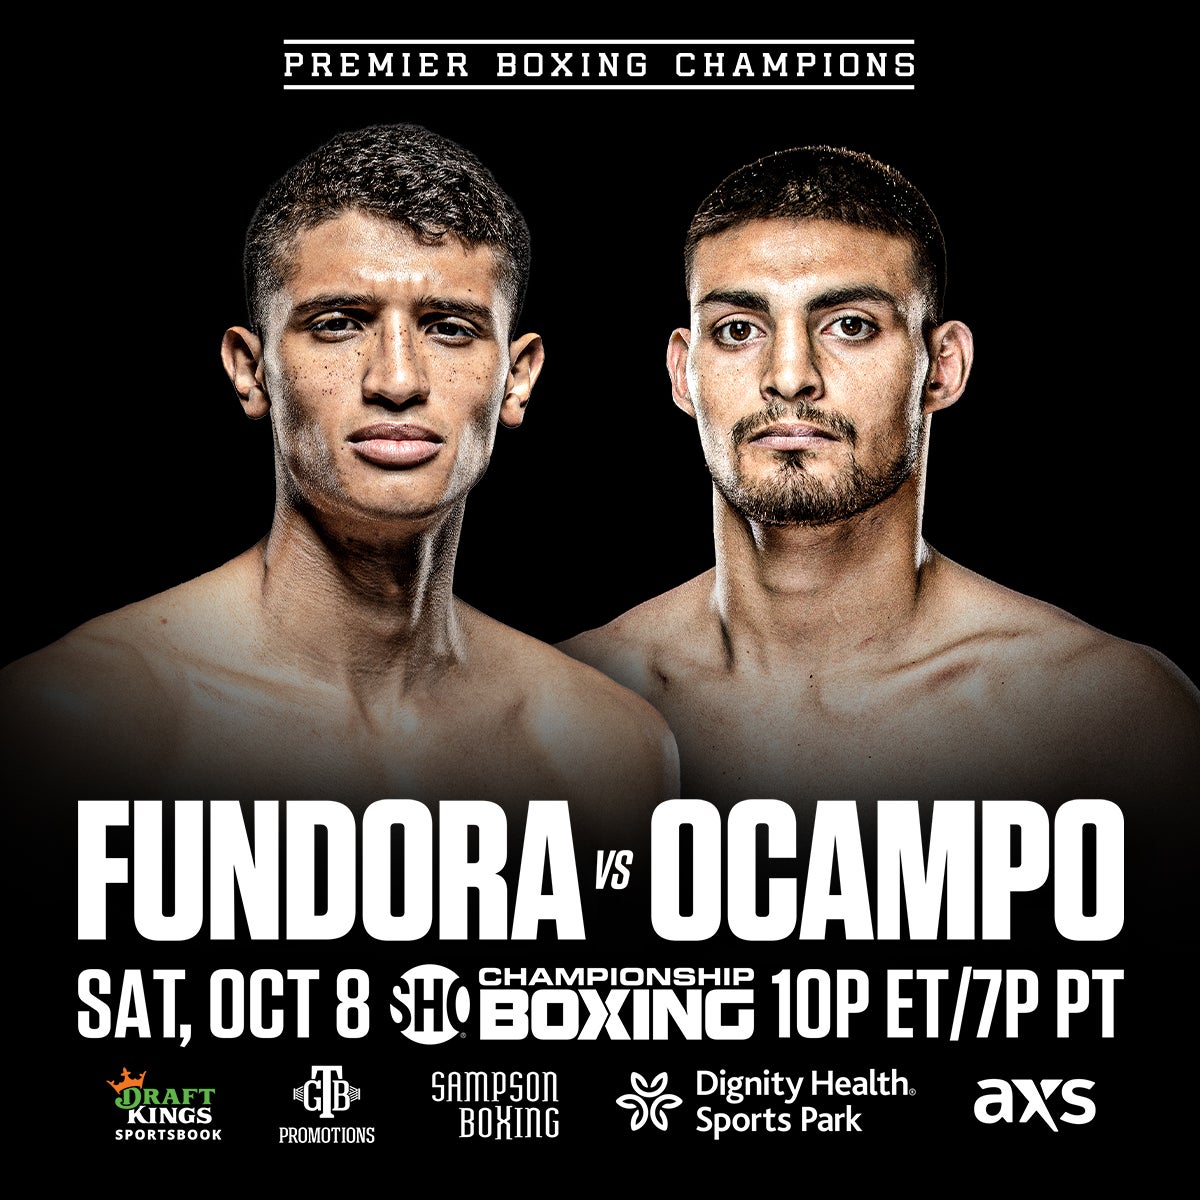 Super Welterweight Sensation Sebastian Fundora Takes On Rising Contender Carlos Ocampo Live On Showtime On Saturday, October 8 Headlining A Premier Boxing Champions Event